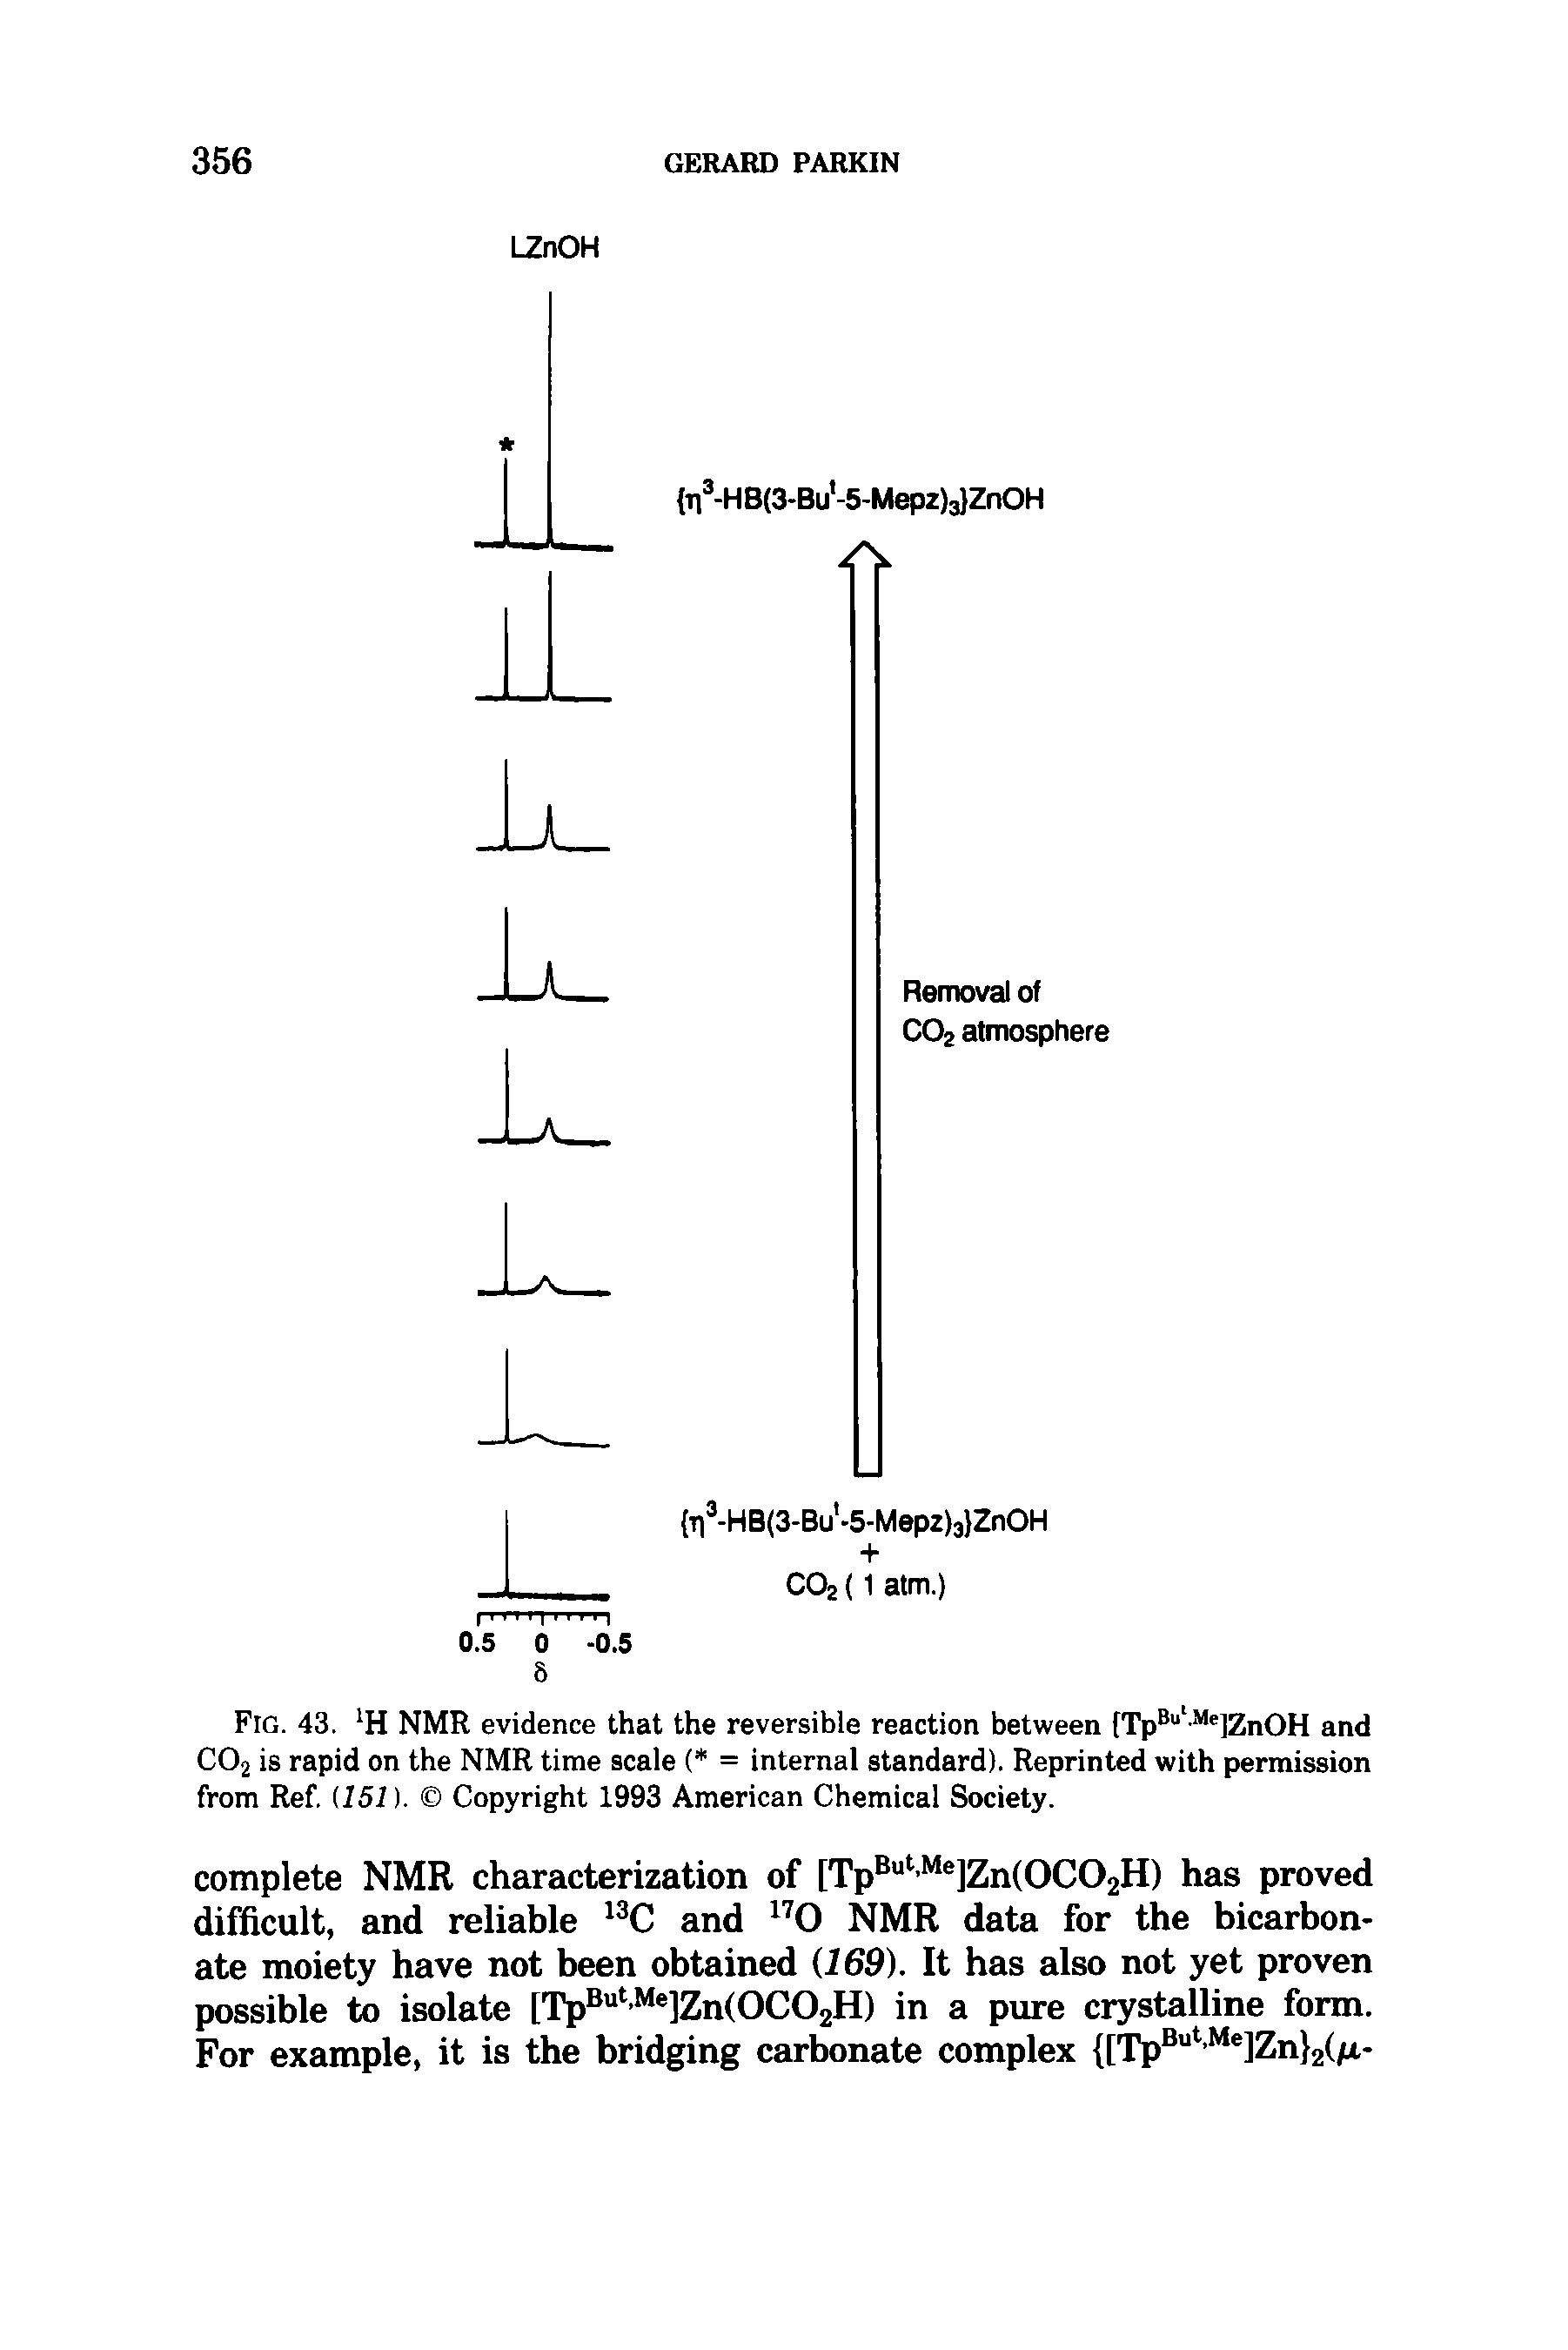 Fig. 43. H NMR evidence that the reversible reaction between [TpBu Me]ZnOH and C02 is rapid on the NMR time scale ( = internal standard). Reprinted with permission from Ref. (151). Copyright 1993 American Chemical Society.